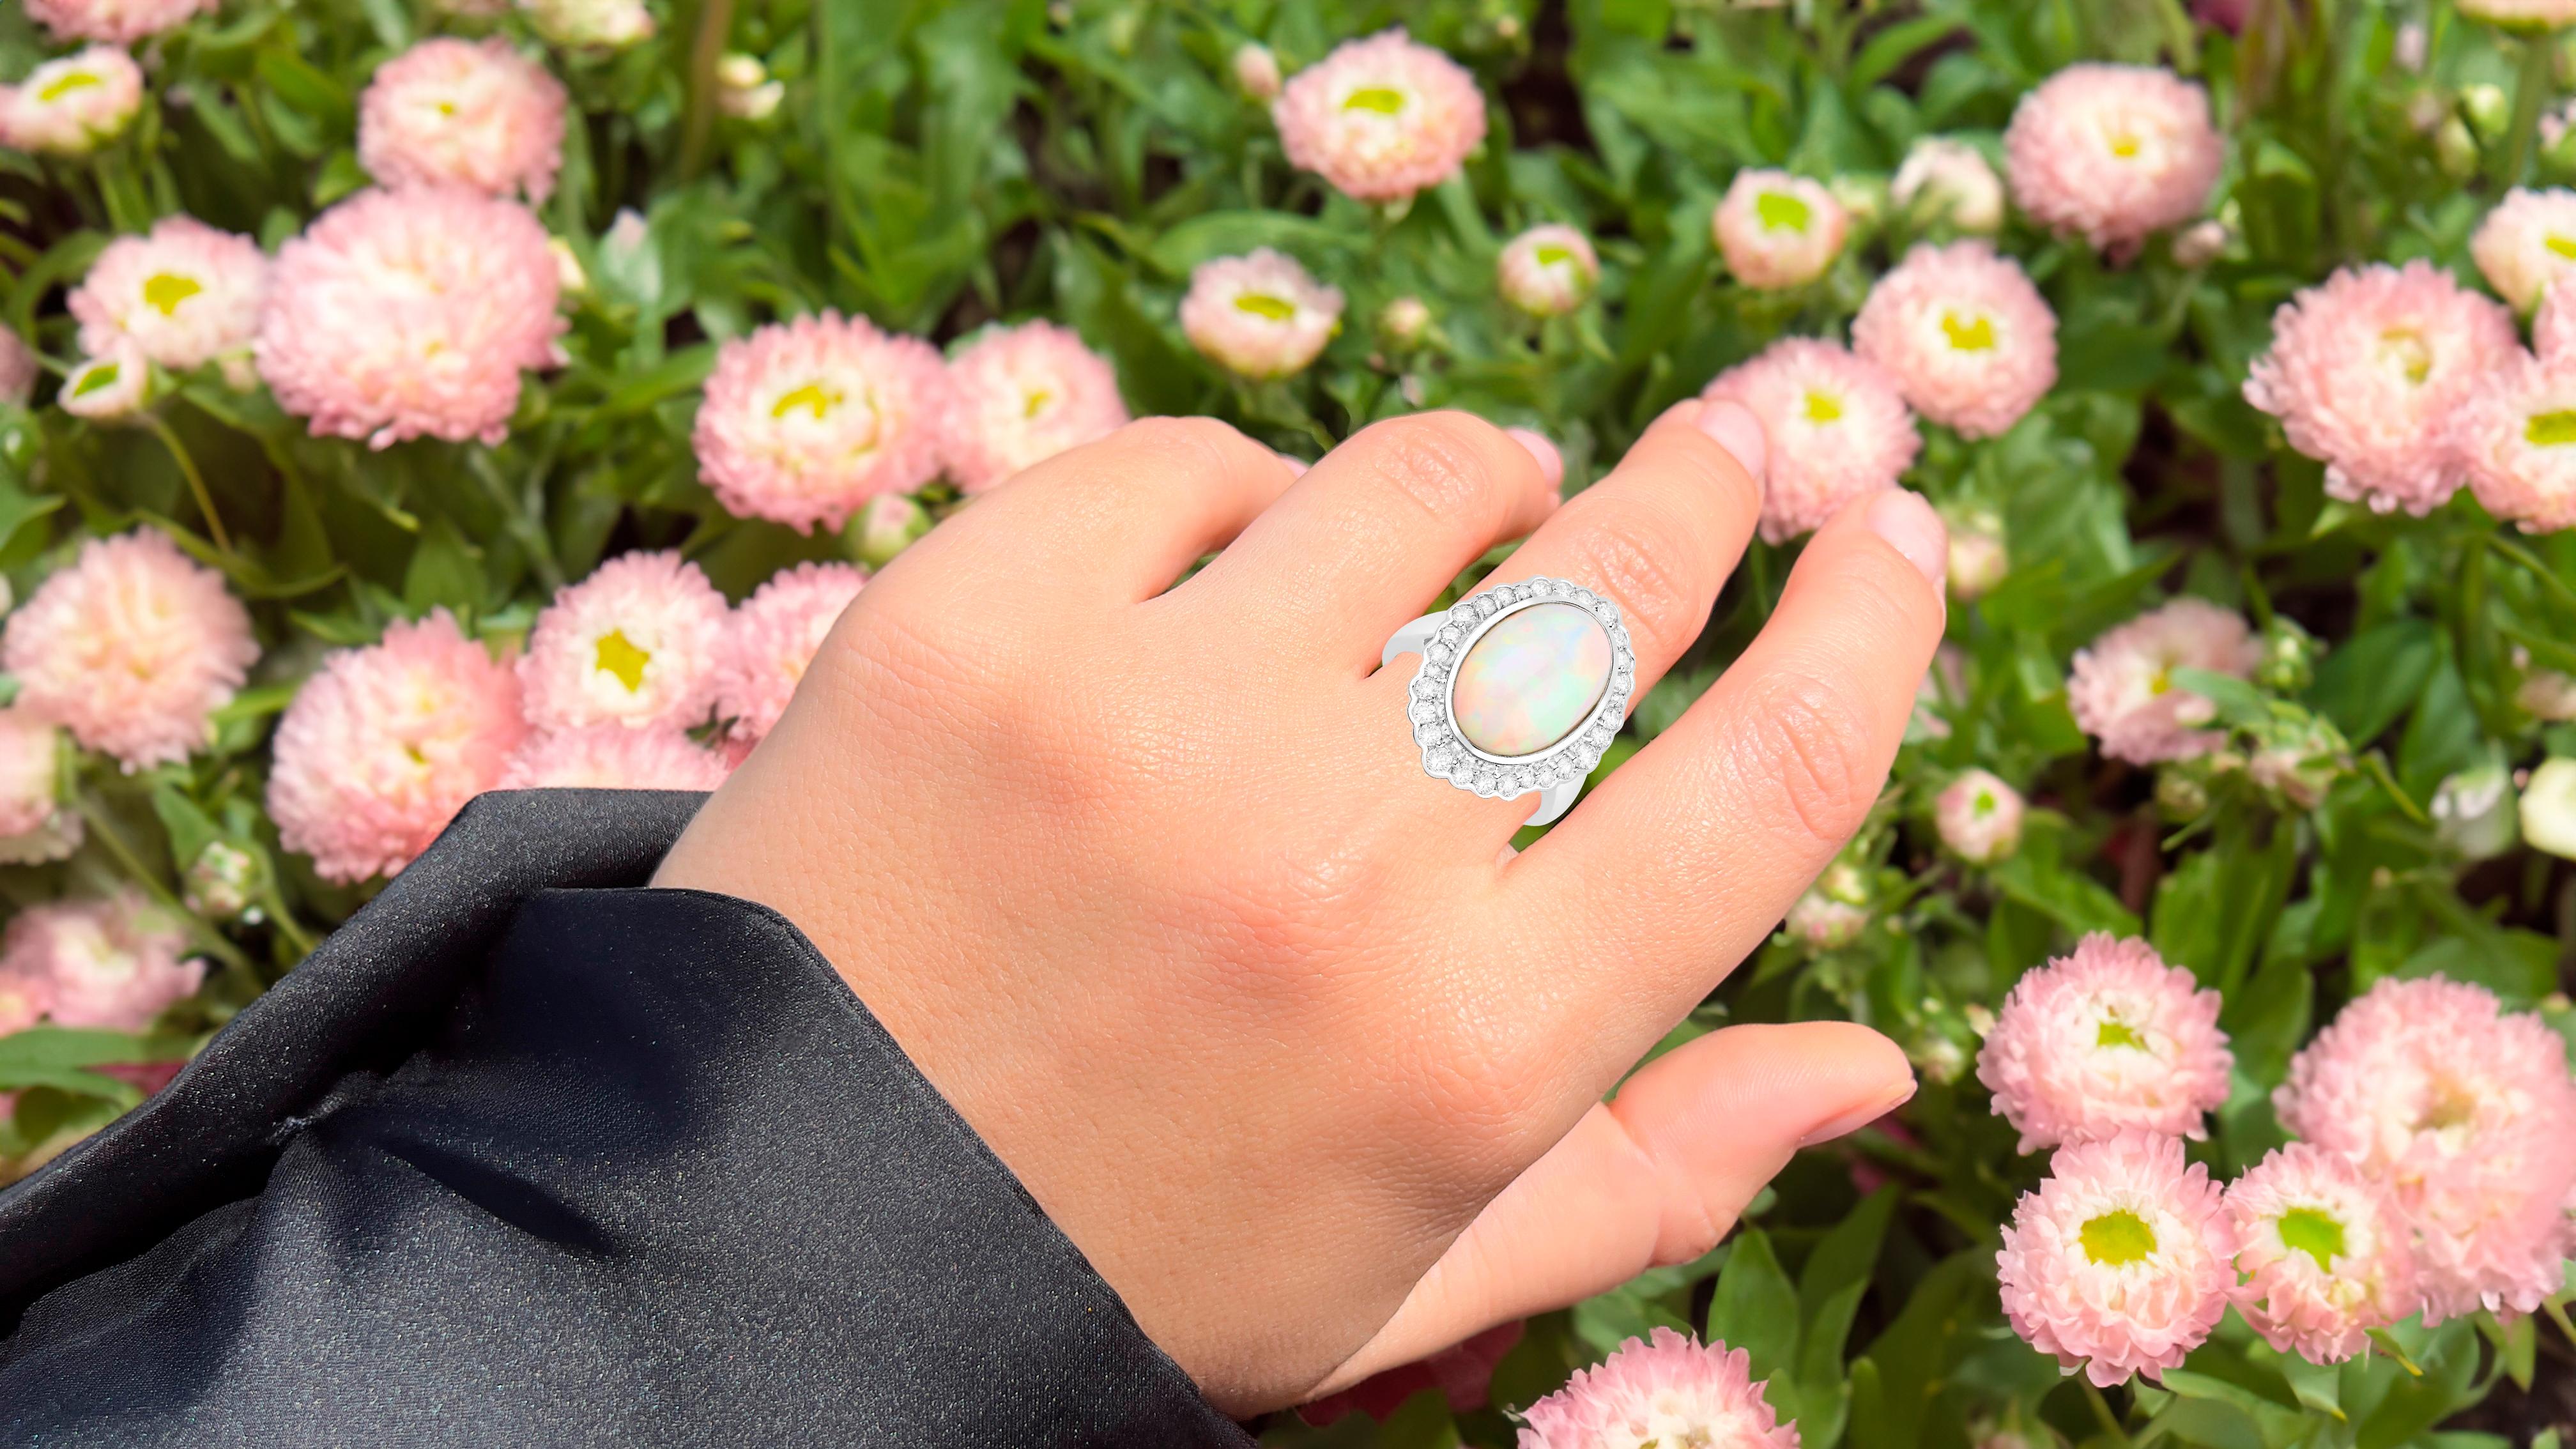 Cabochon Ethiopian Opal Ring With Diamonds 6.38 Carats 14K White Gold For Sale